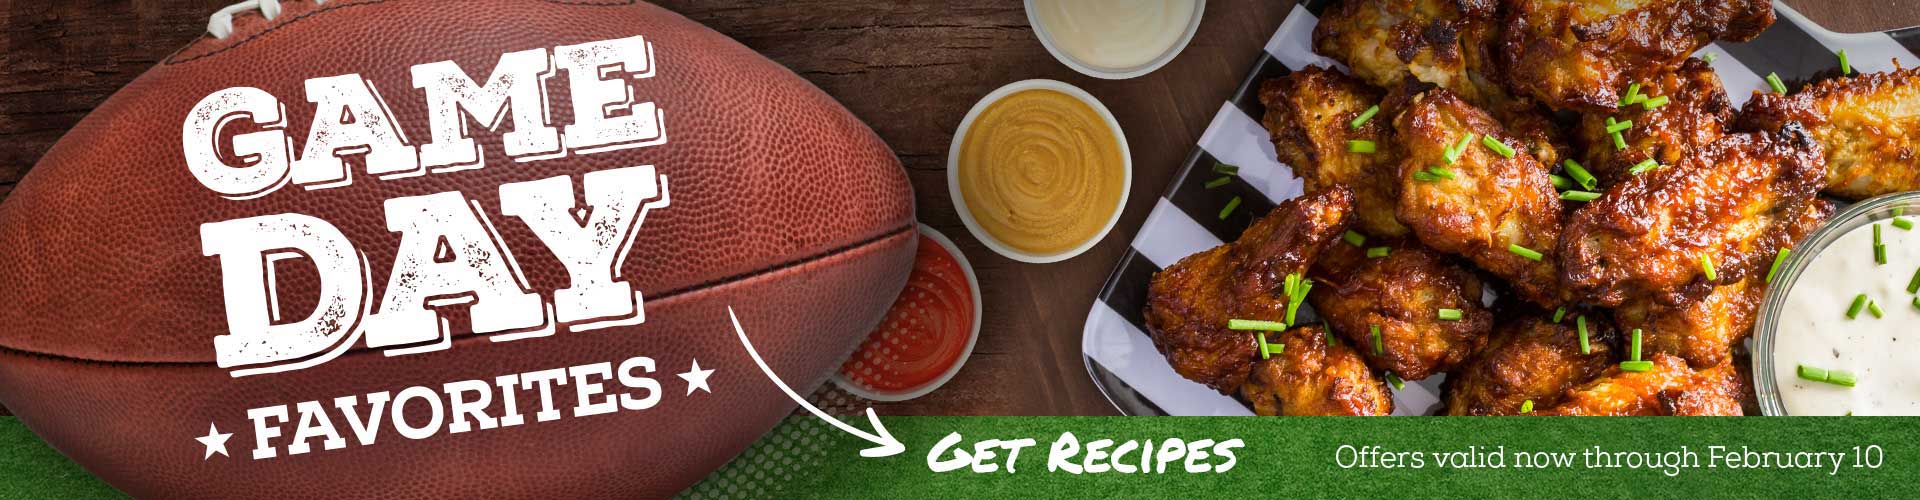 Game Day Favorites image with football and wings